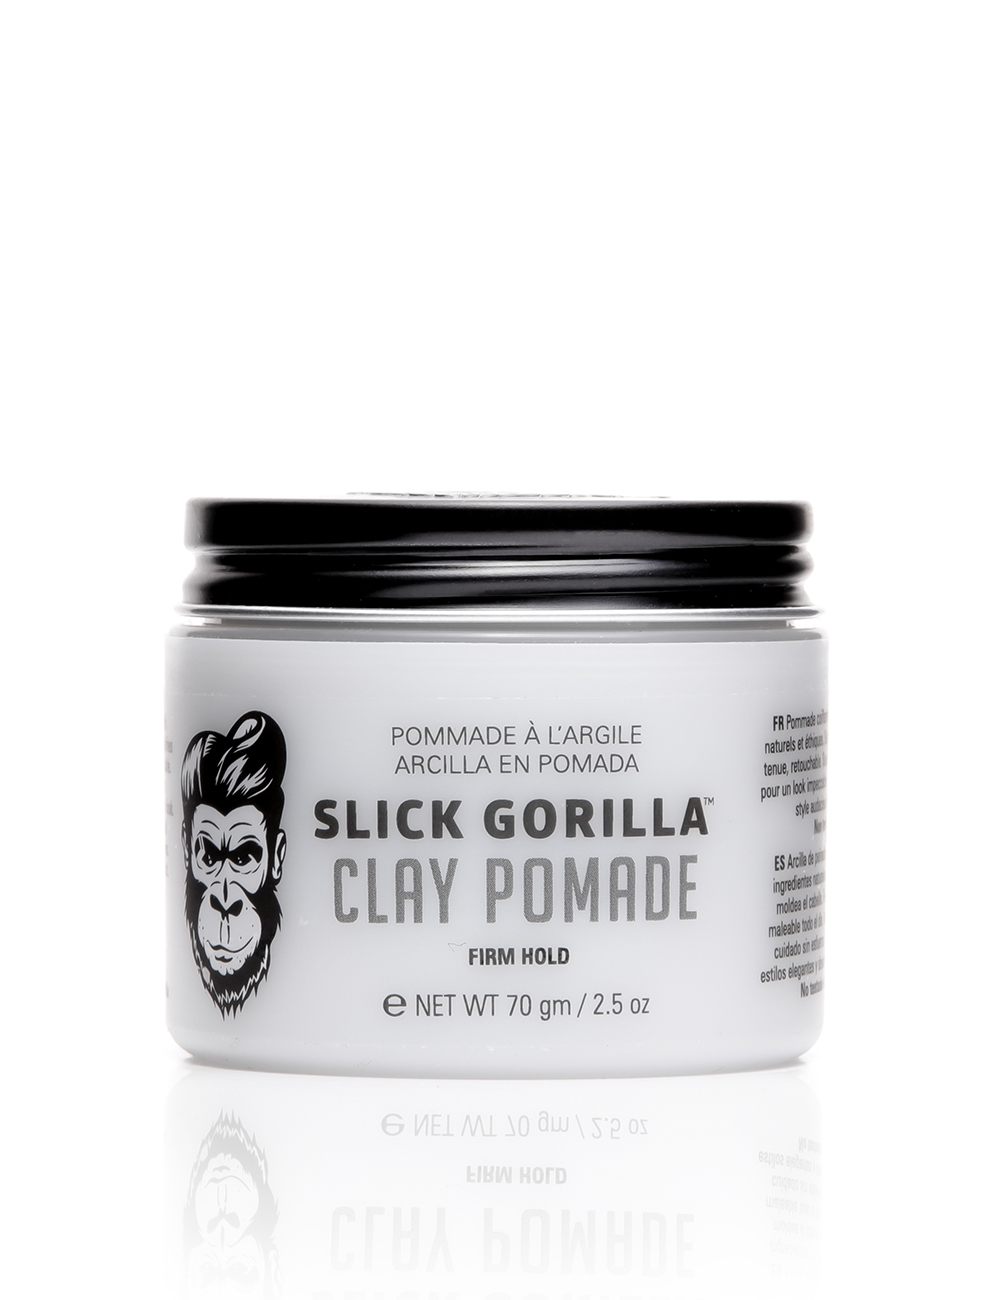 Slick Gorilla Clay Pomade - Hair Styling Product - Slick Styles